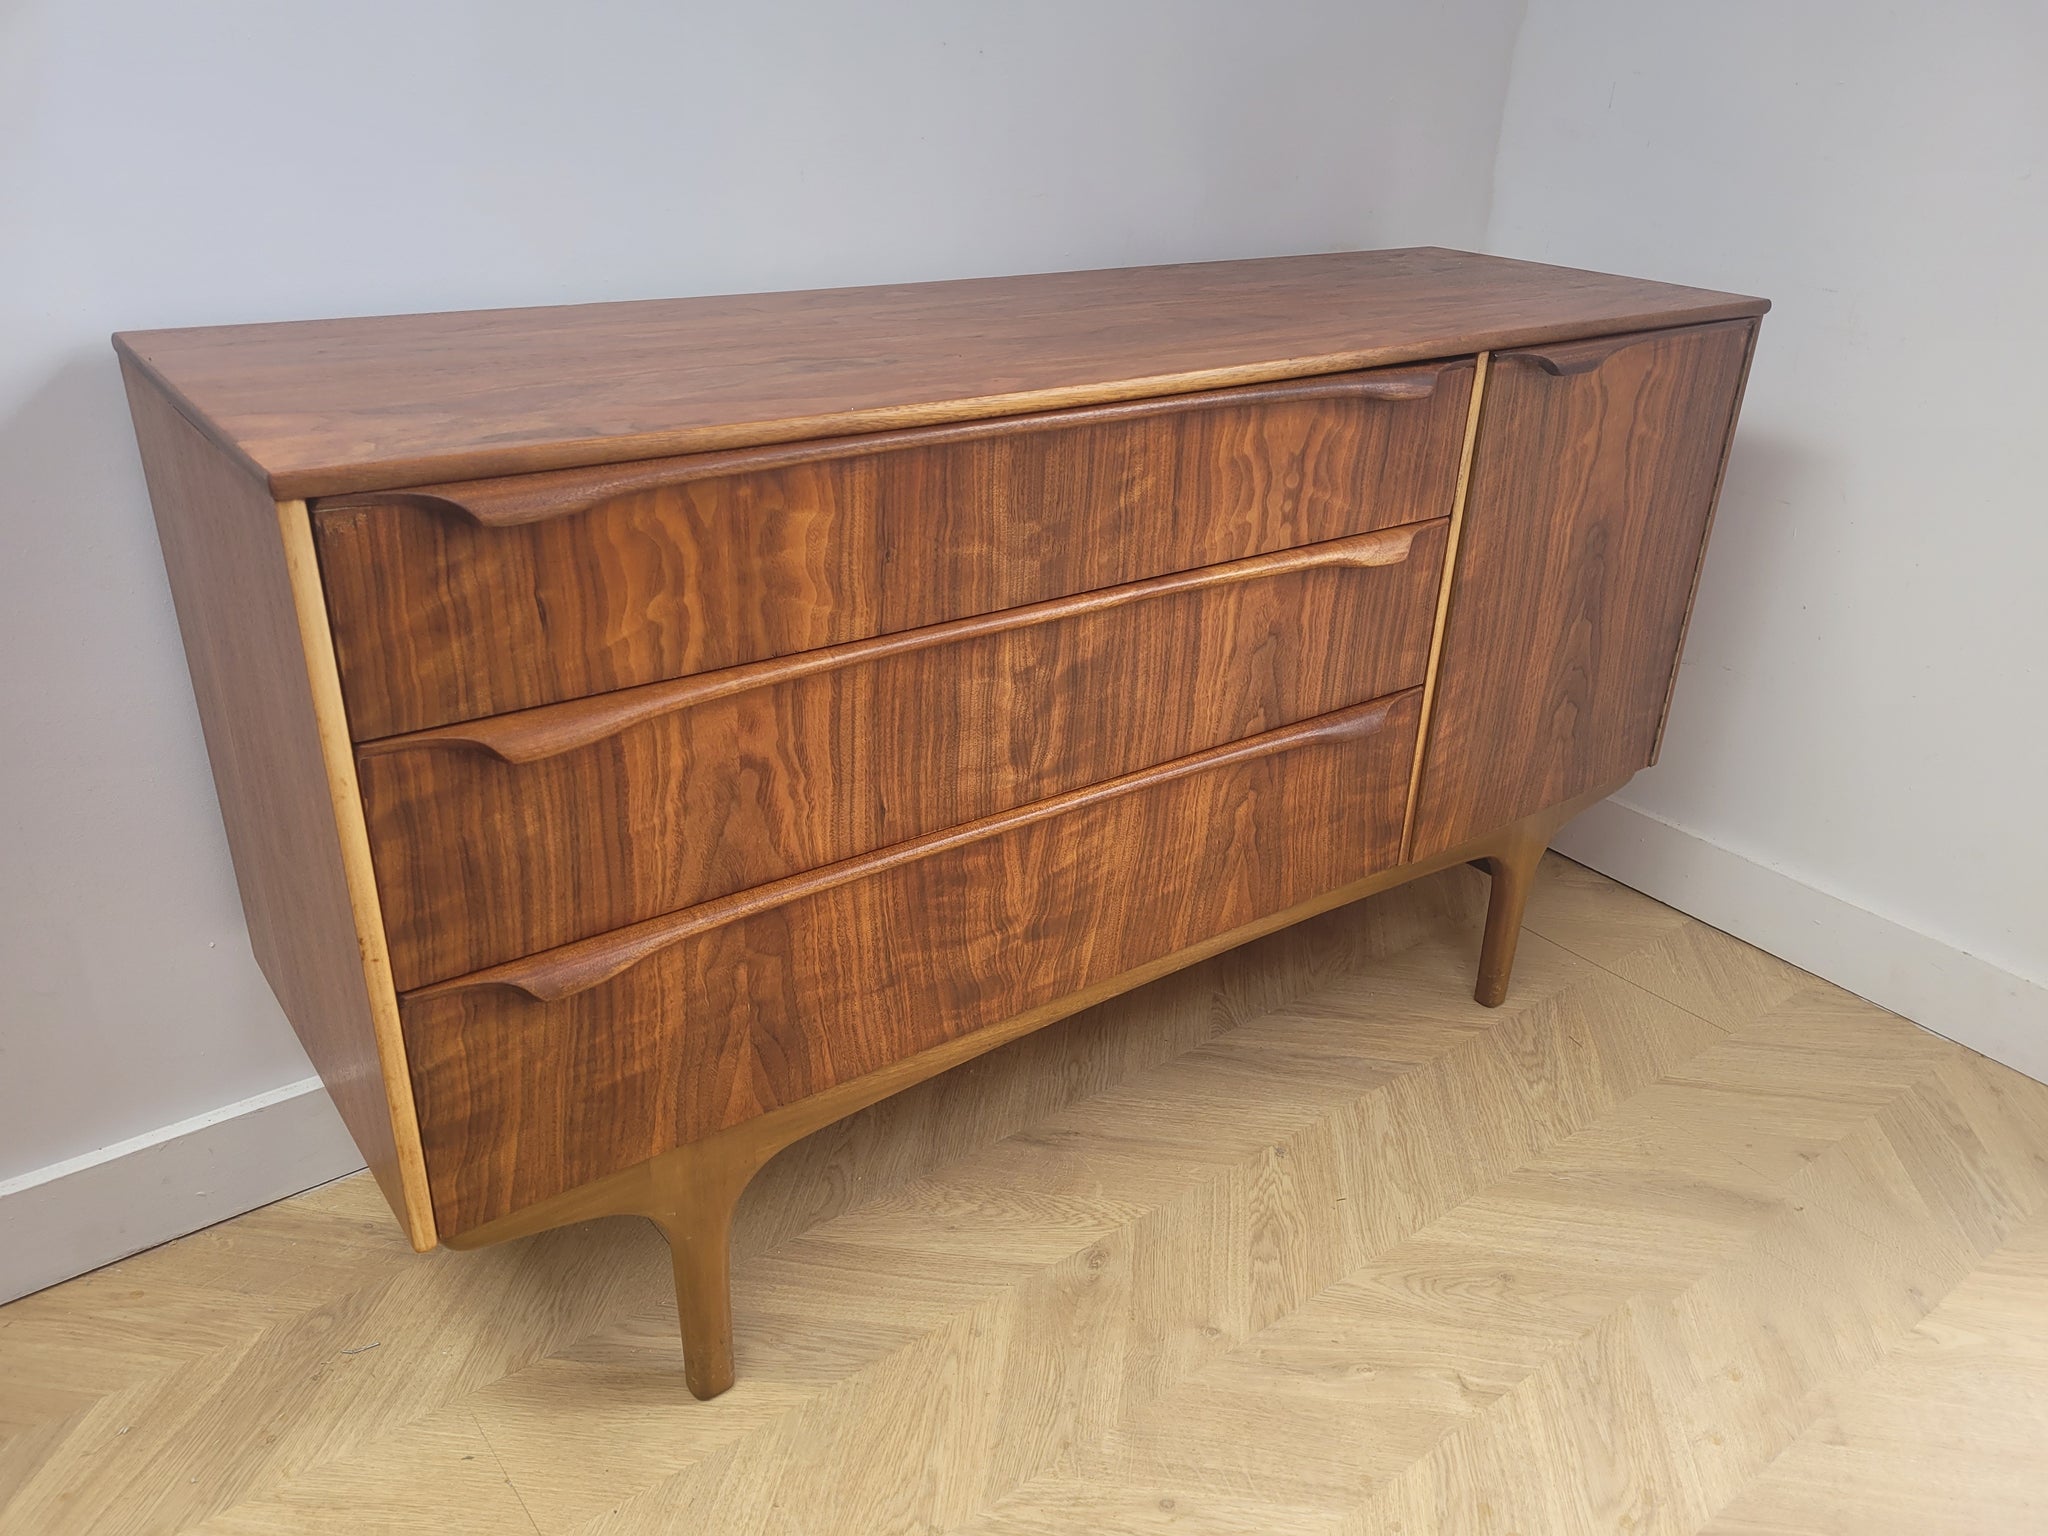 Sutcliffe of Todmorden Compact Sideboard